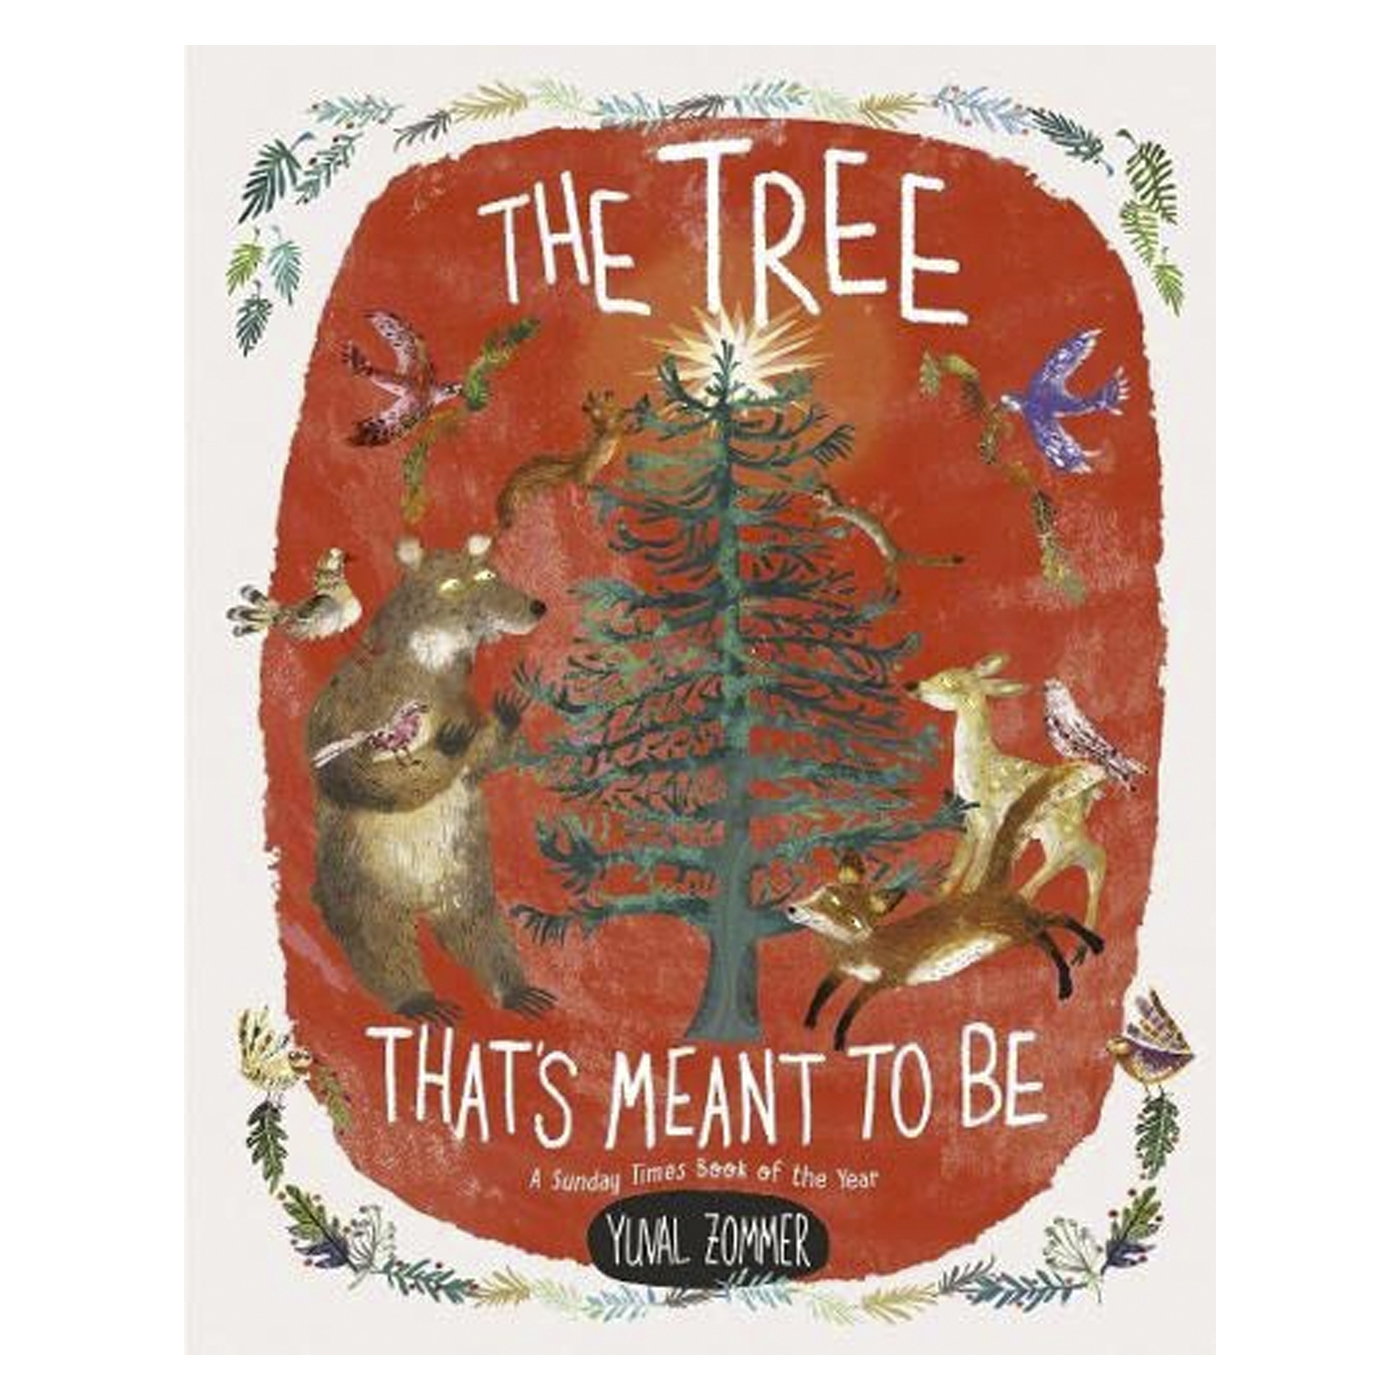 OXFORD CHILDRENS BOOK The Tree Thats Meant To Be